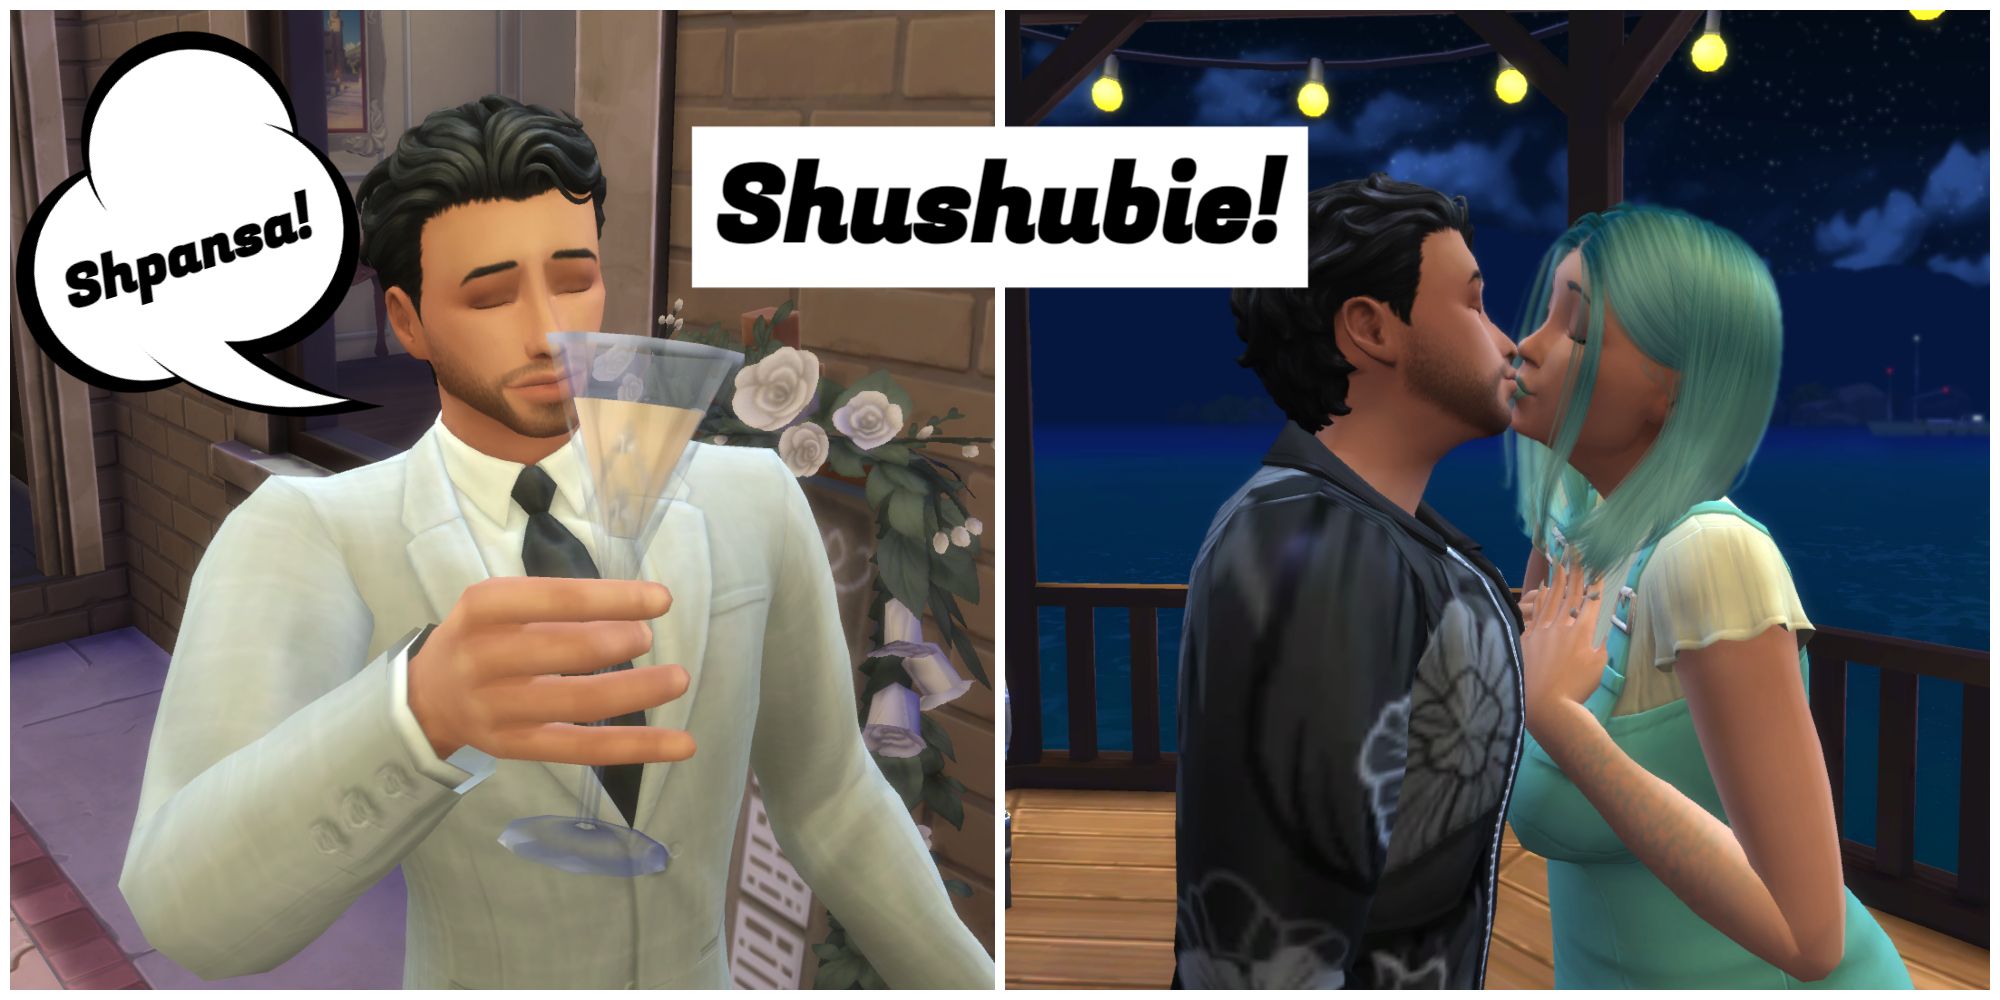 The Sims kiss on New Year's and say Shushubie and Shpansa in Simlish to celebrate